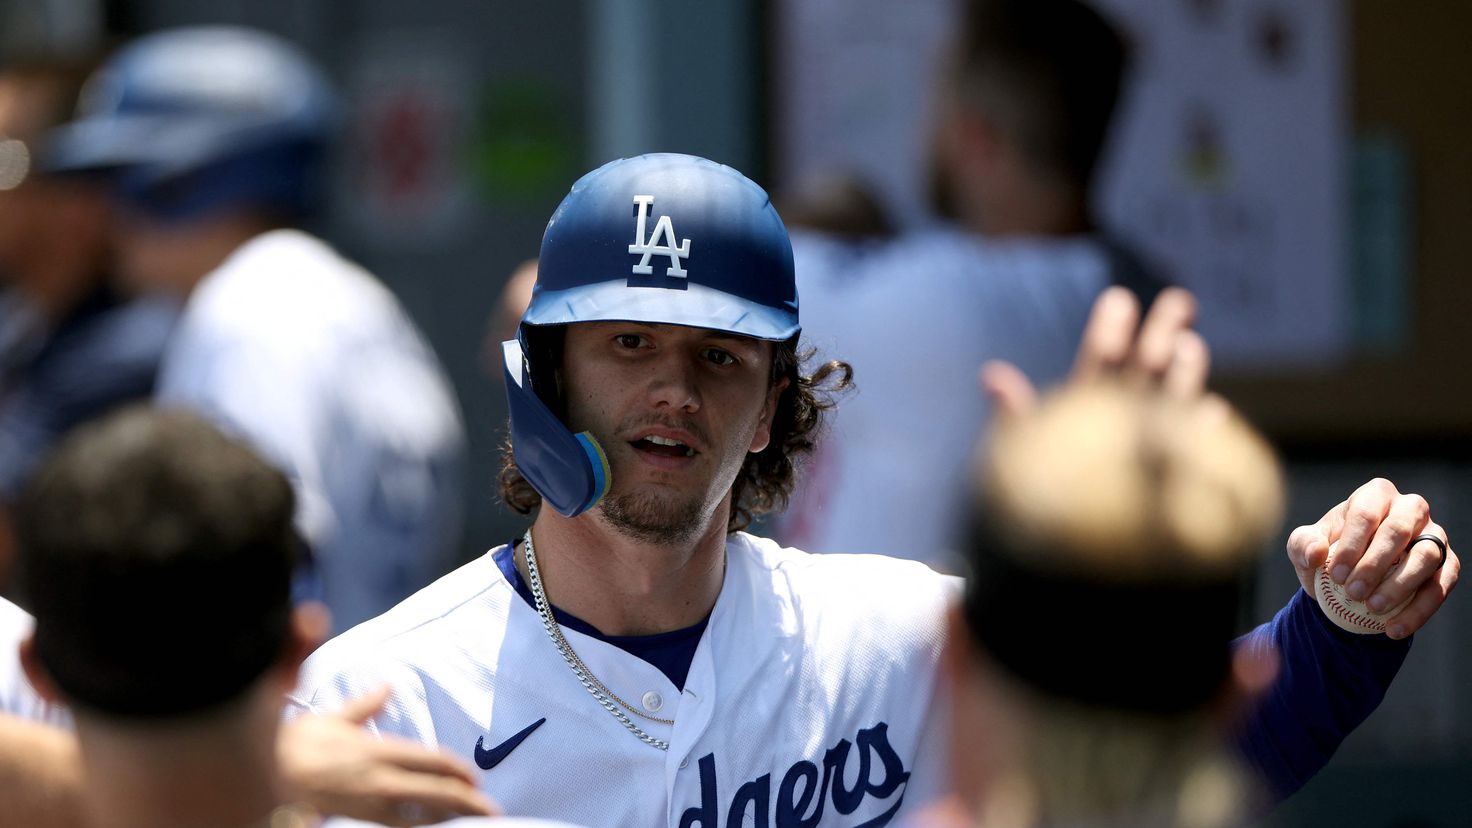 Dodgers' rookie sensation leads them to win over Twins
